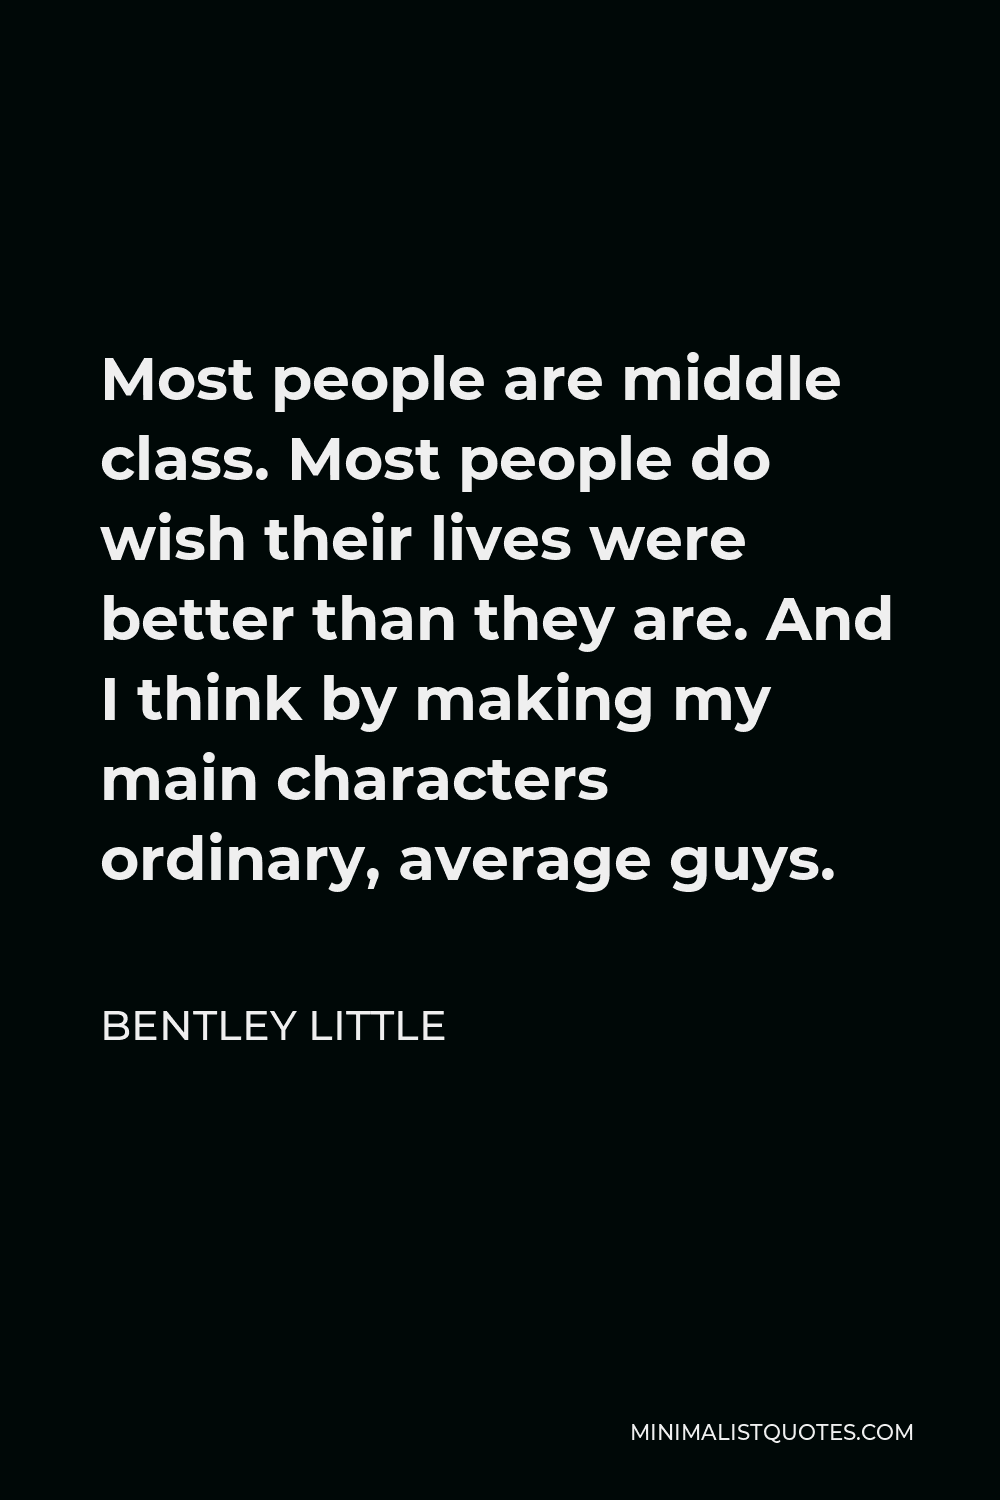 Bentley Little Quote - Most people are middle class. Most people do wish their lives were better than they are. And I think by making my main characters ordinary, average guys.